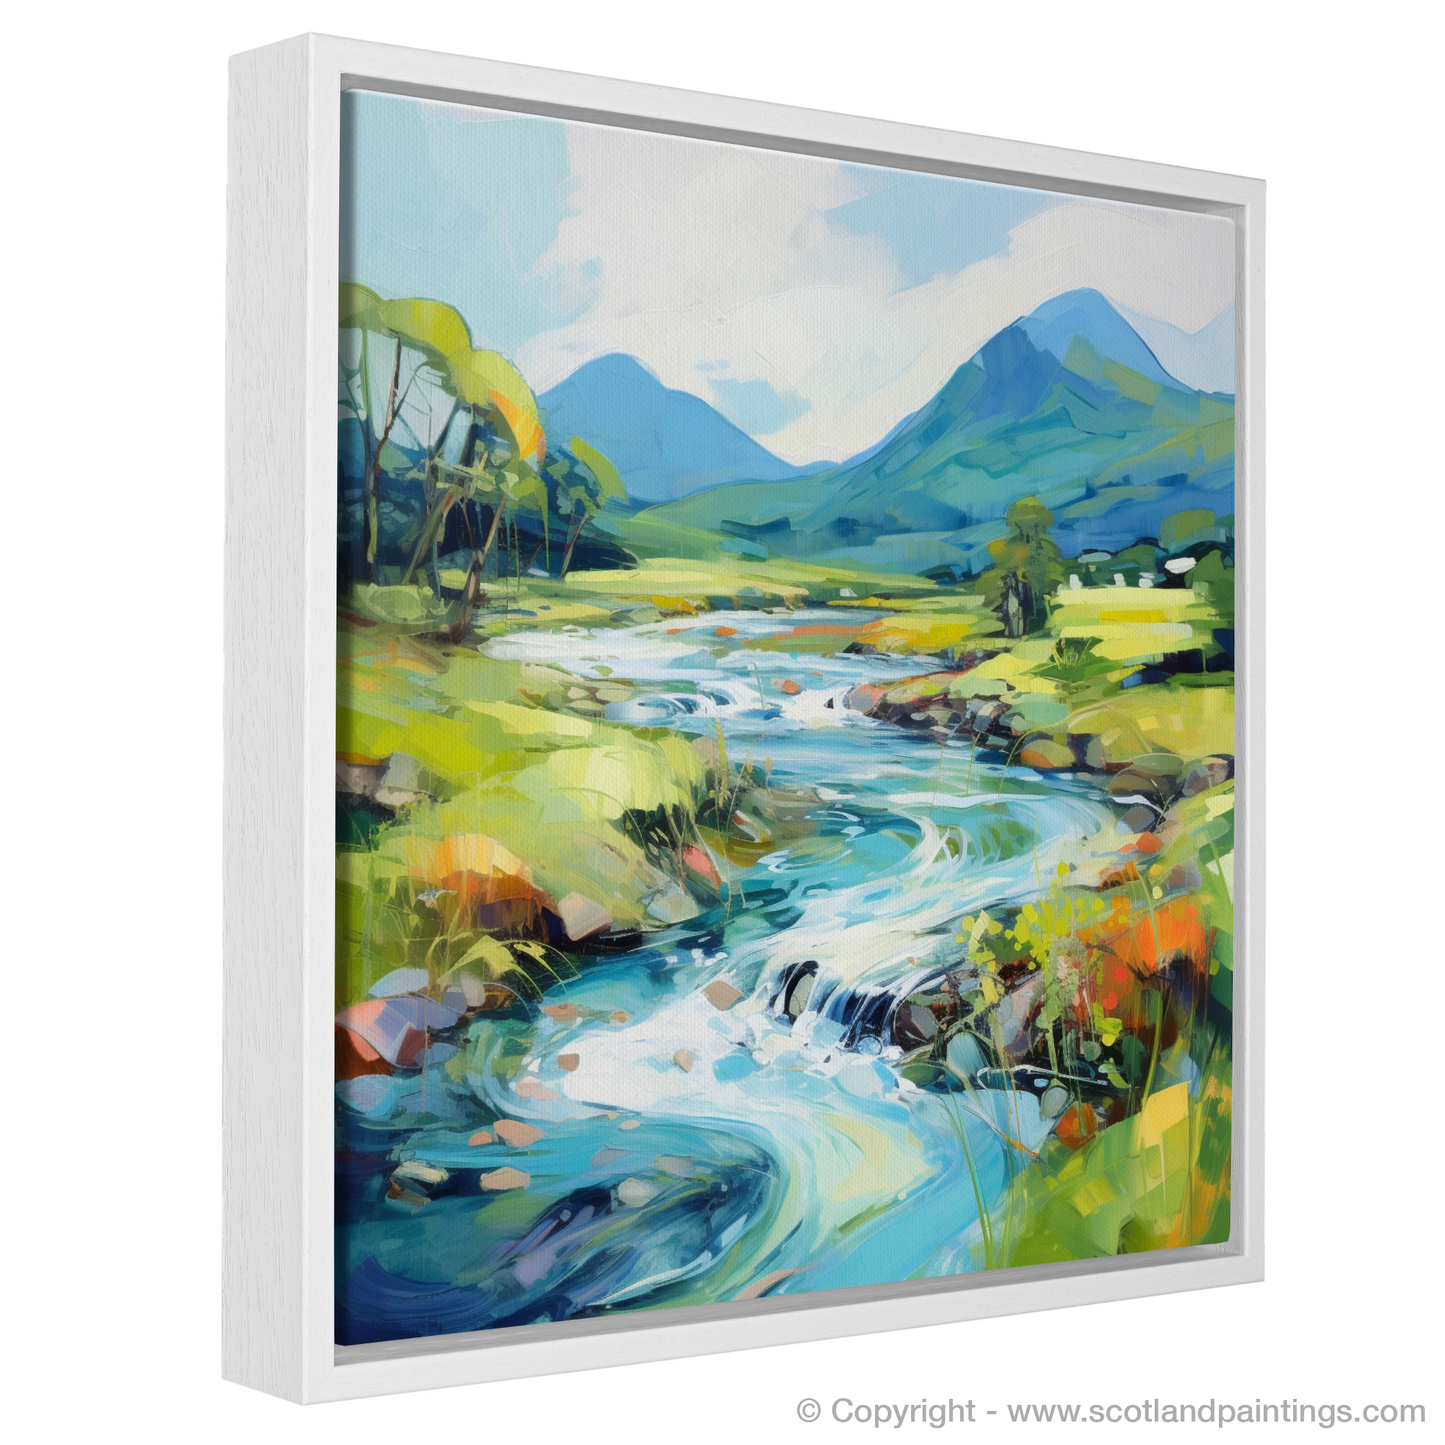 Painting and Art Print of River Etive, Argyll and Bute in summer entitled "Summer Serenade by River Etive".